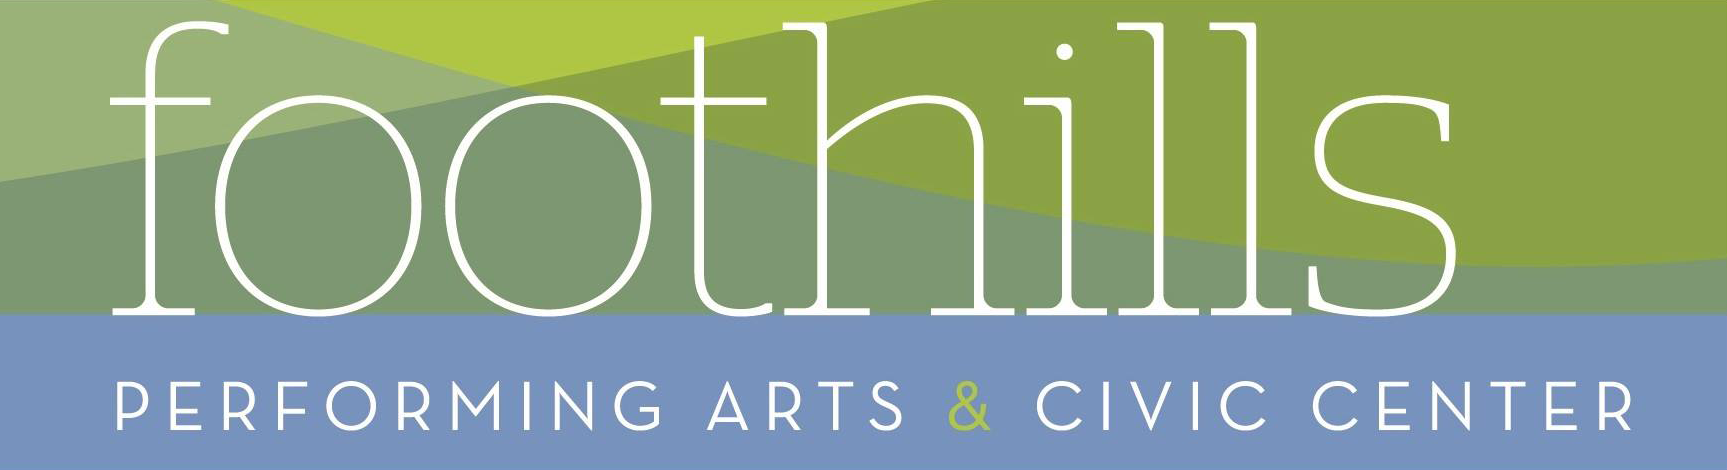 Foothills Performing Arts & Civic Center